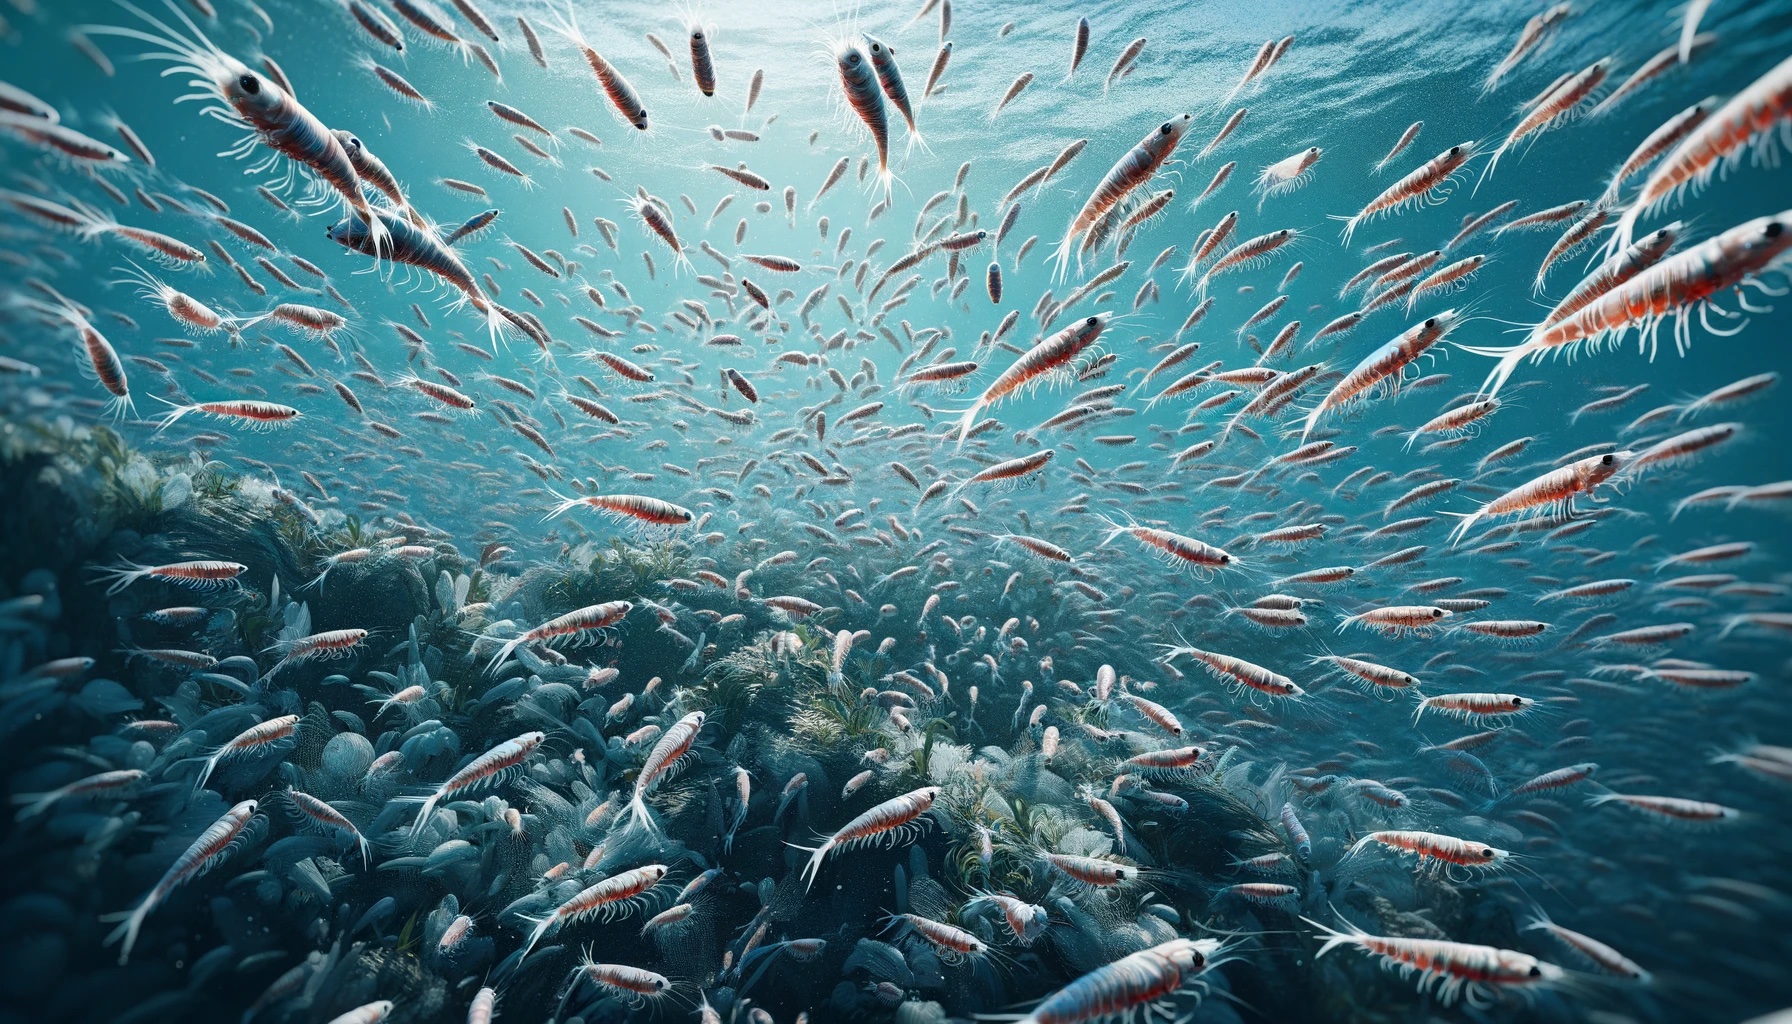 Krill Fishing: The Hidden Threat to Our Oceans